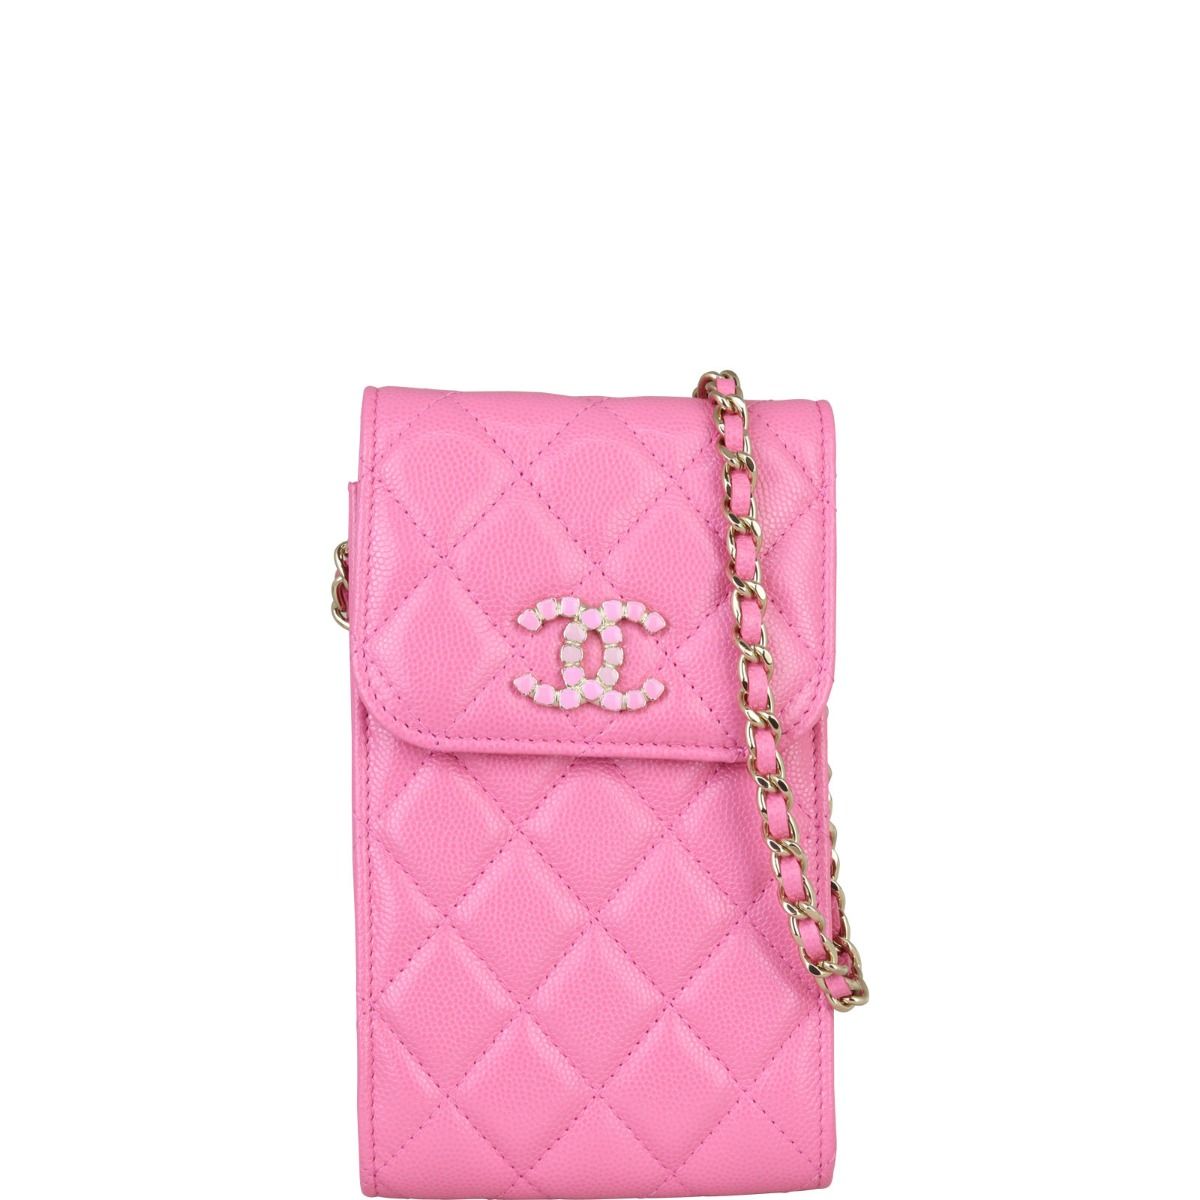 Chanel Phone Holder with Chain